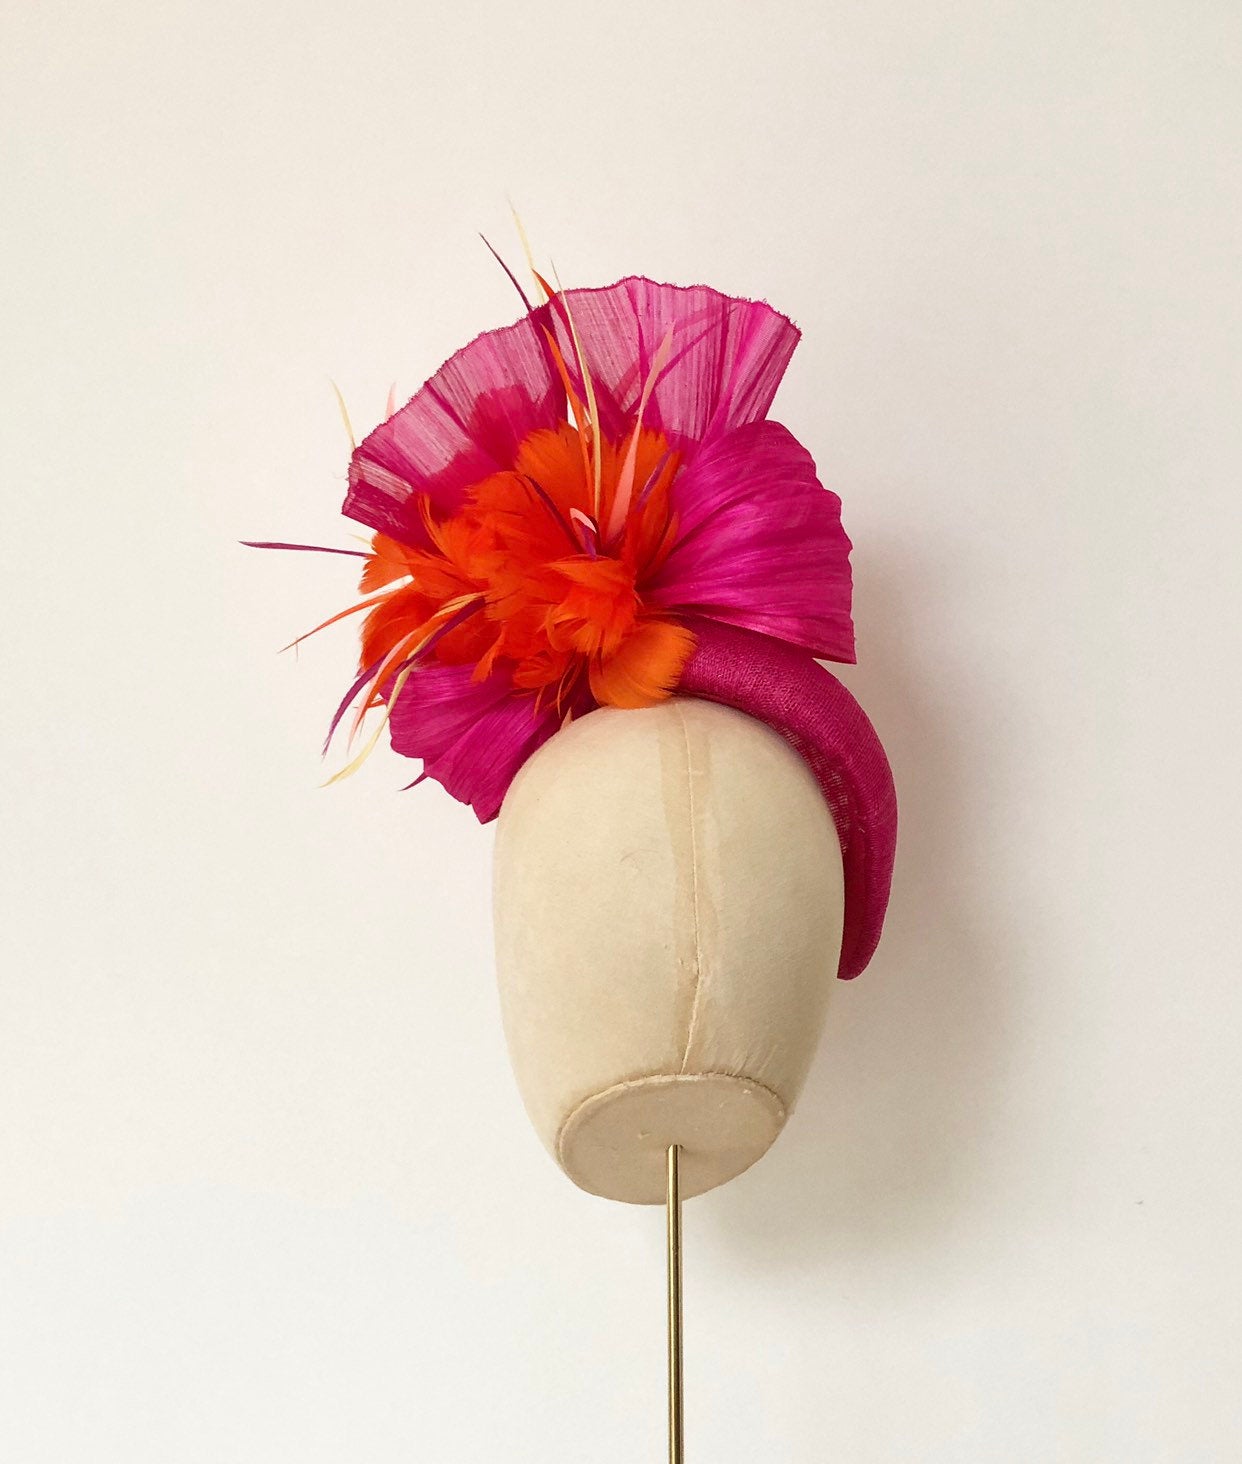 hot pink bright orange pillbox fascnator hat for weddings and royal ascot, silk abaca and feather flower finish